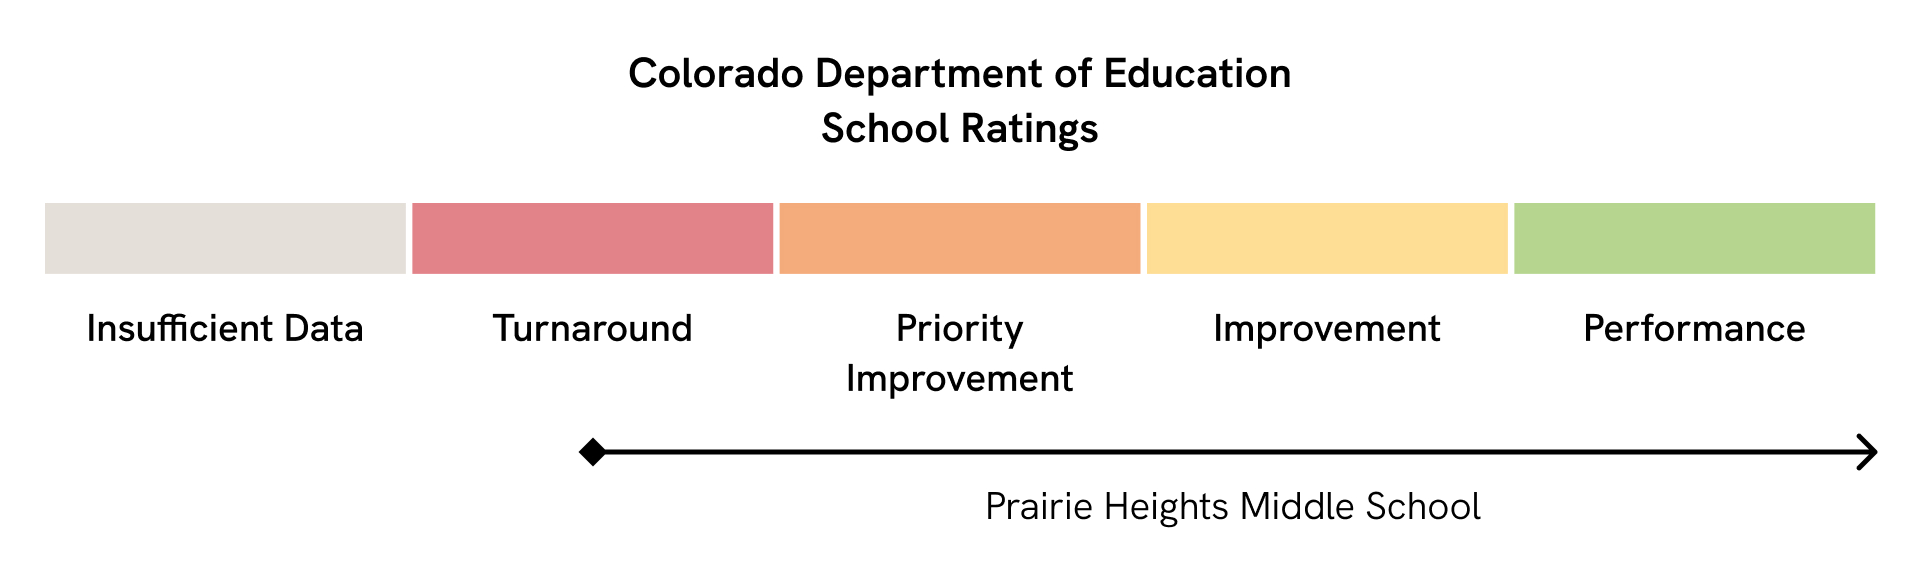 A graphic showing that Prairie Heights Middle School improved its Colorado Department of Education school rating from “turnaround,” the second lowest level, to “performance,” the highest level.